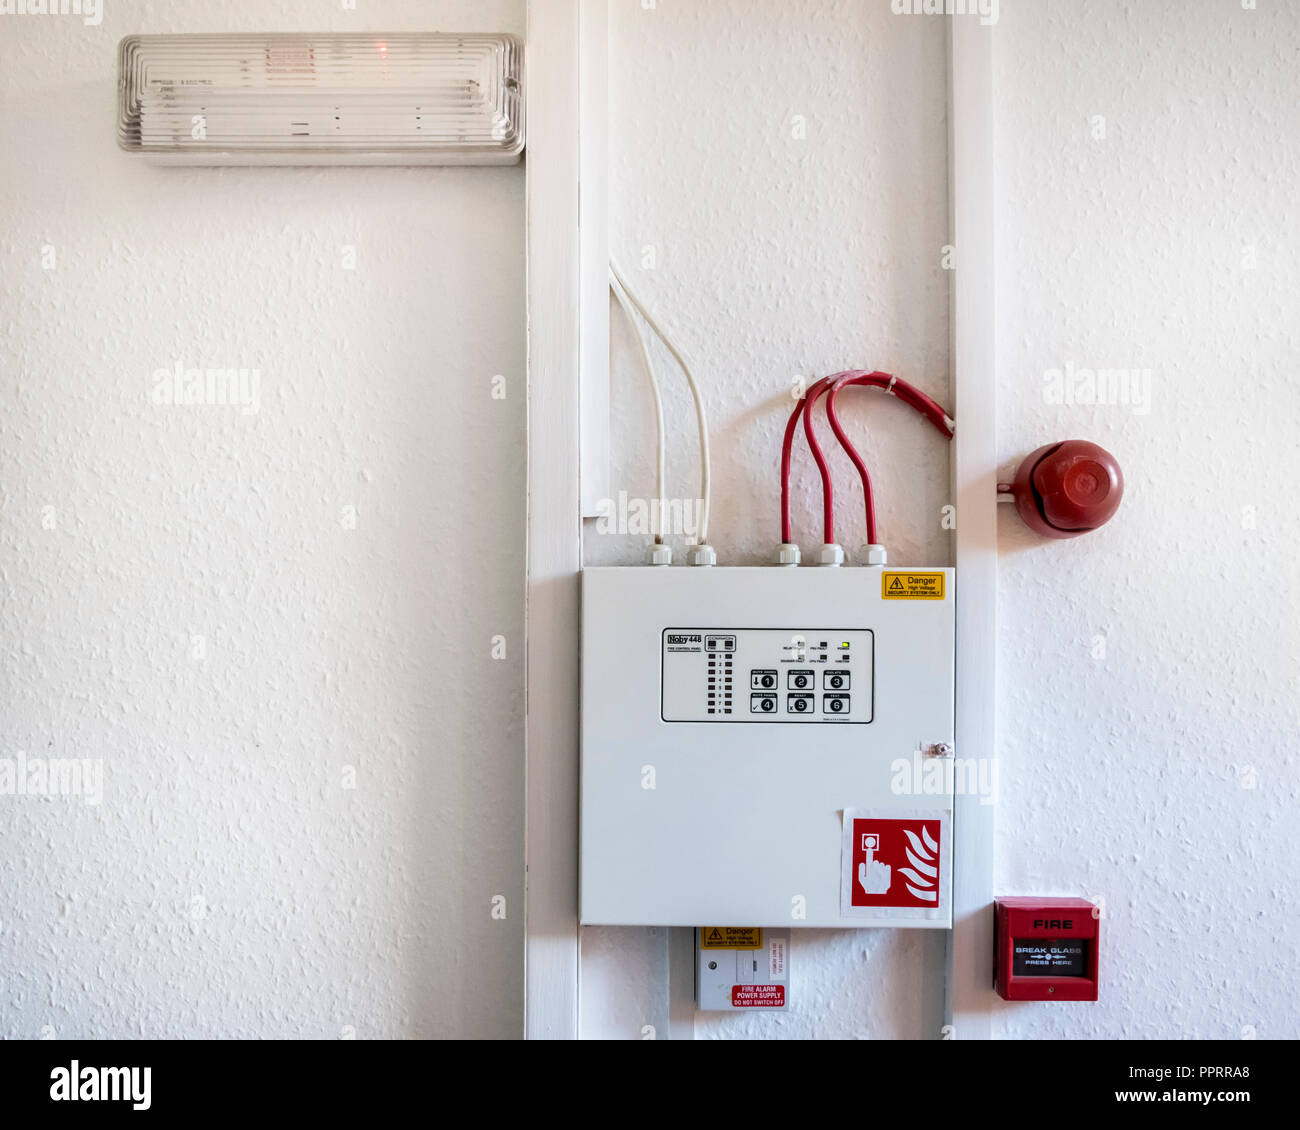 Fire alarm system with fire bell, safety light and a Noby 448 fire control panel. England, UK Stock Photo